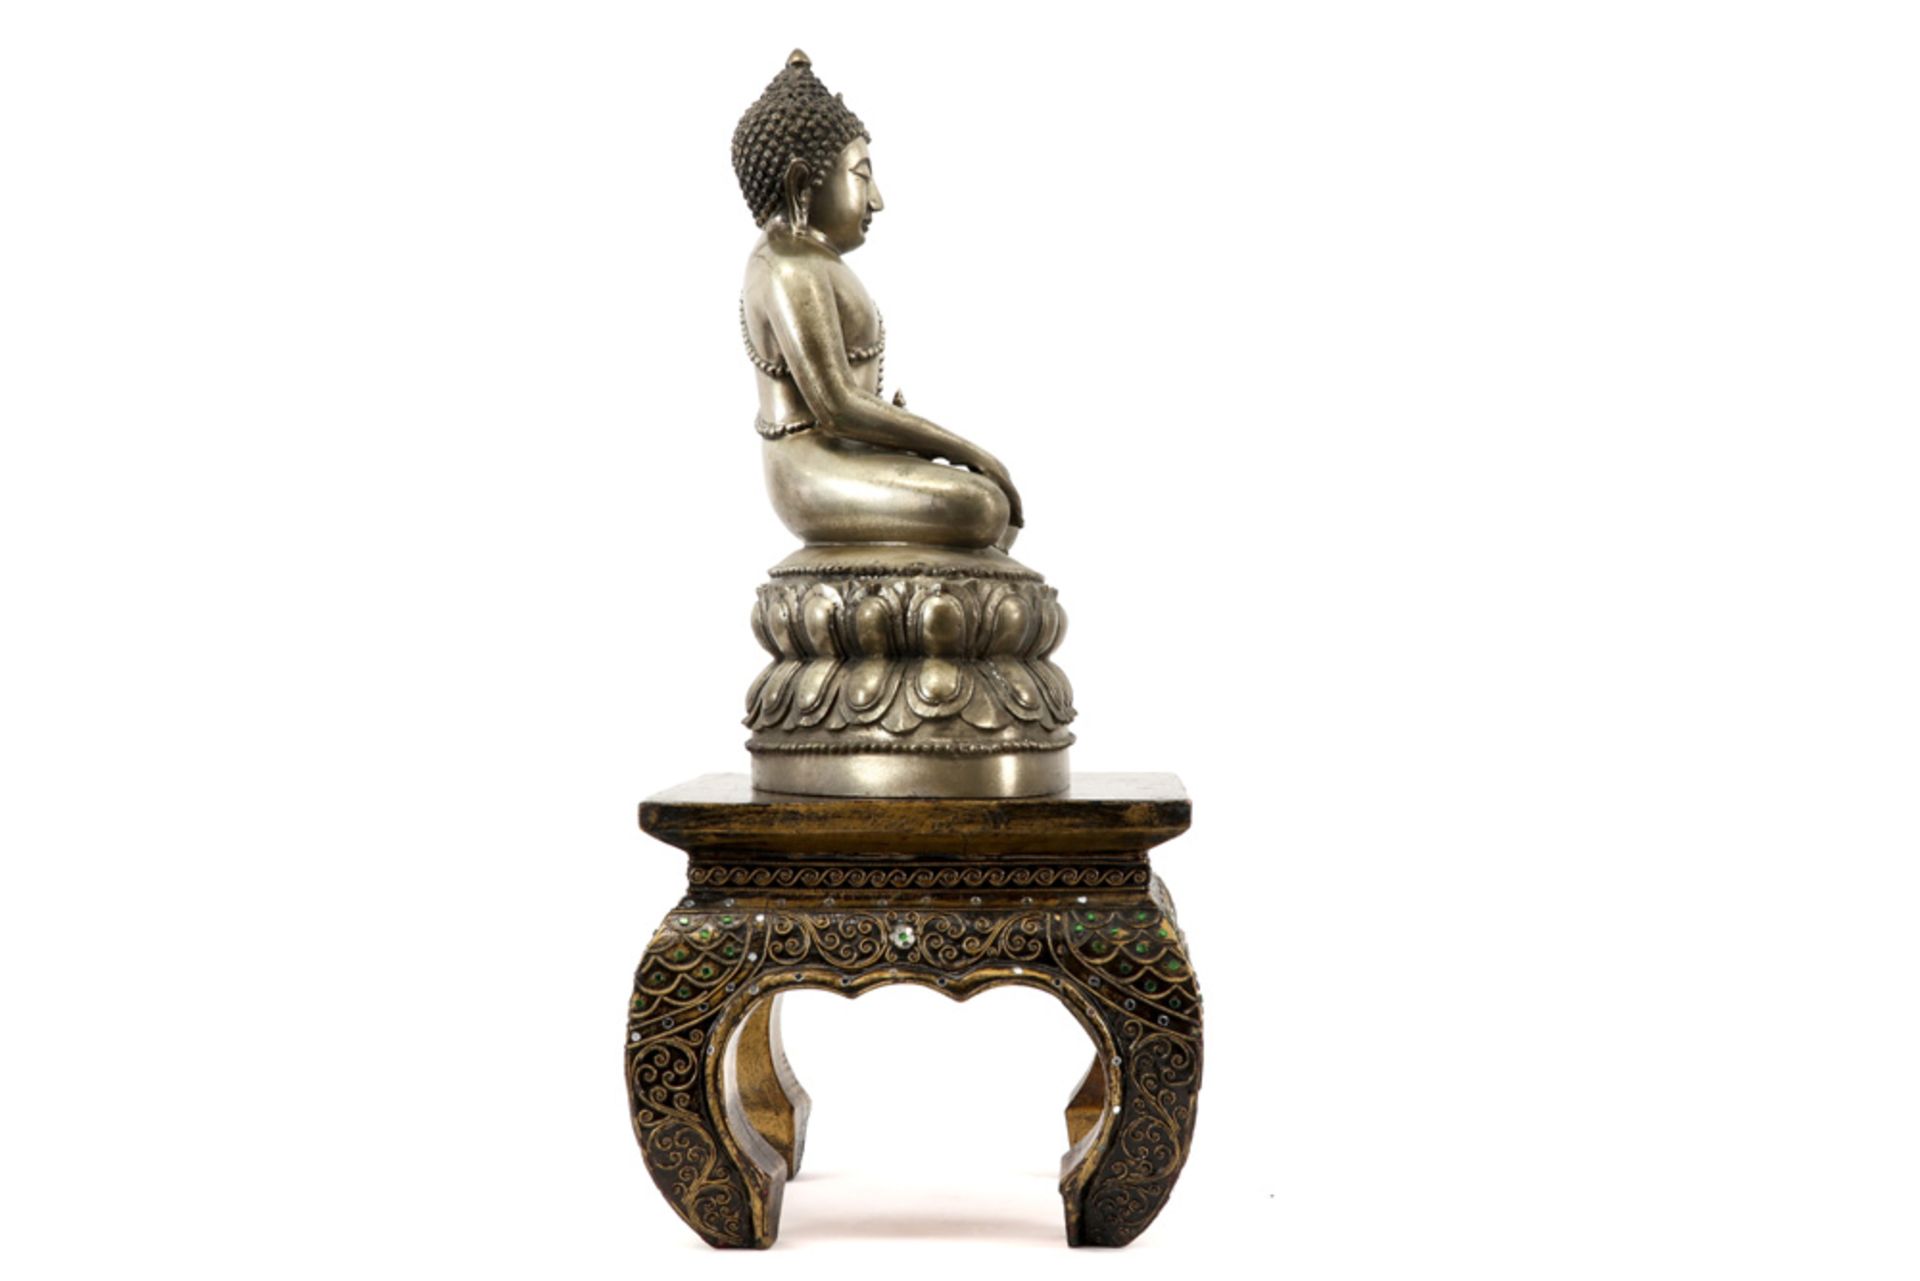 Burmese Shan style "Buddha" sculpture in silverplated bronze - on a gilded stand ||Birmaanse - Image 3 of 6